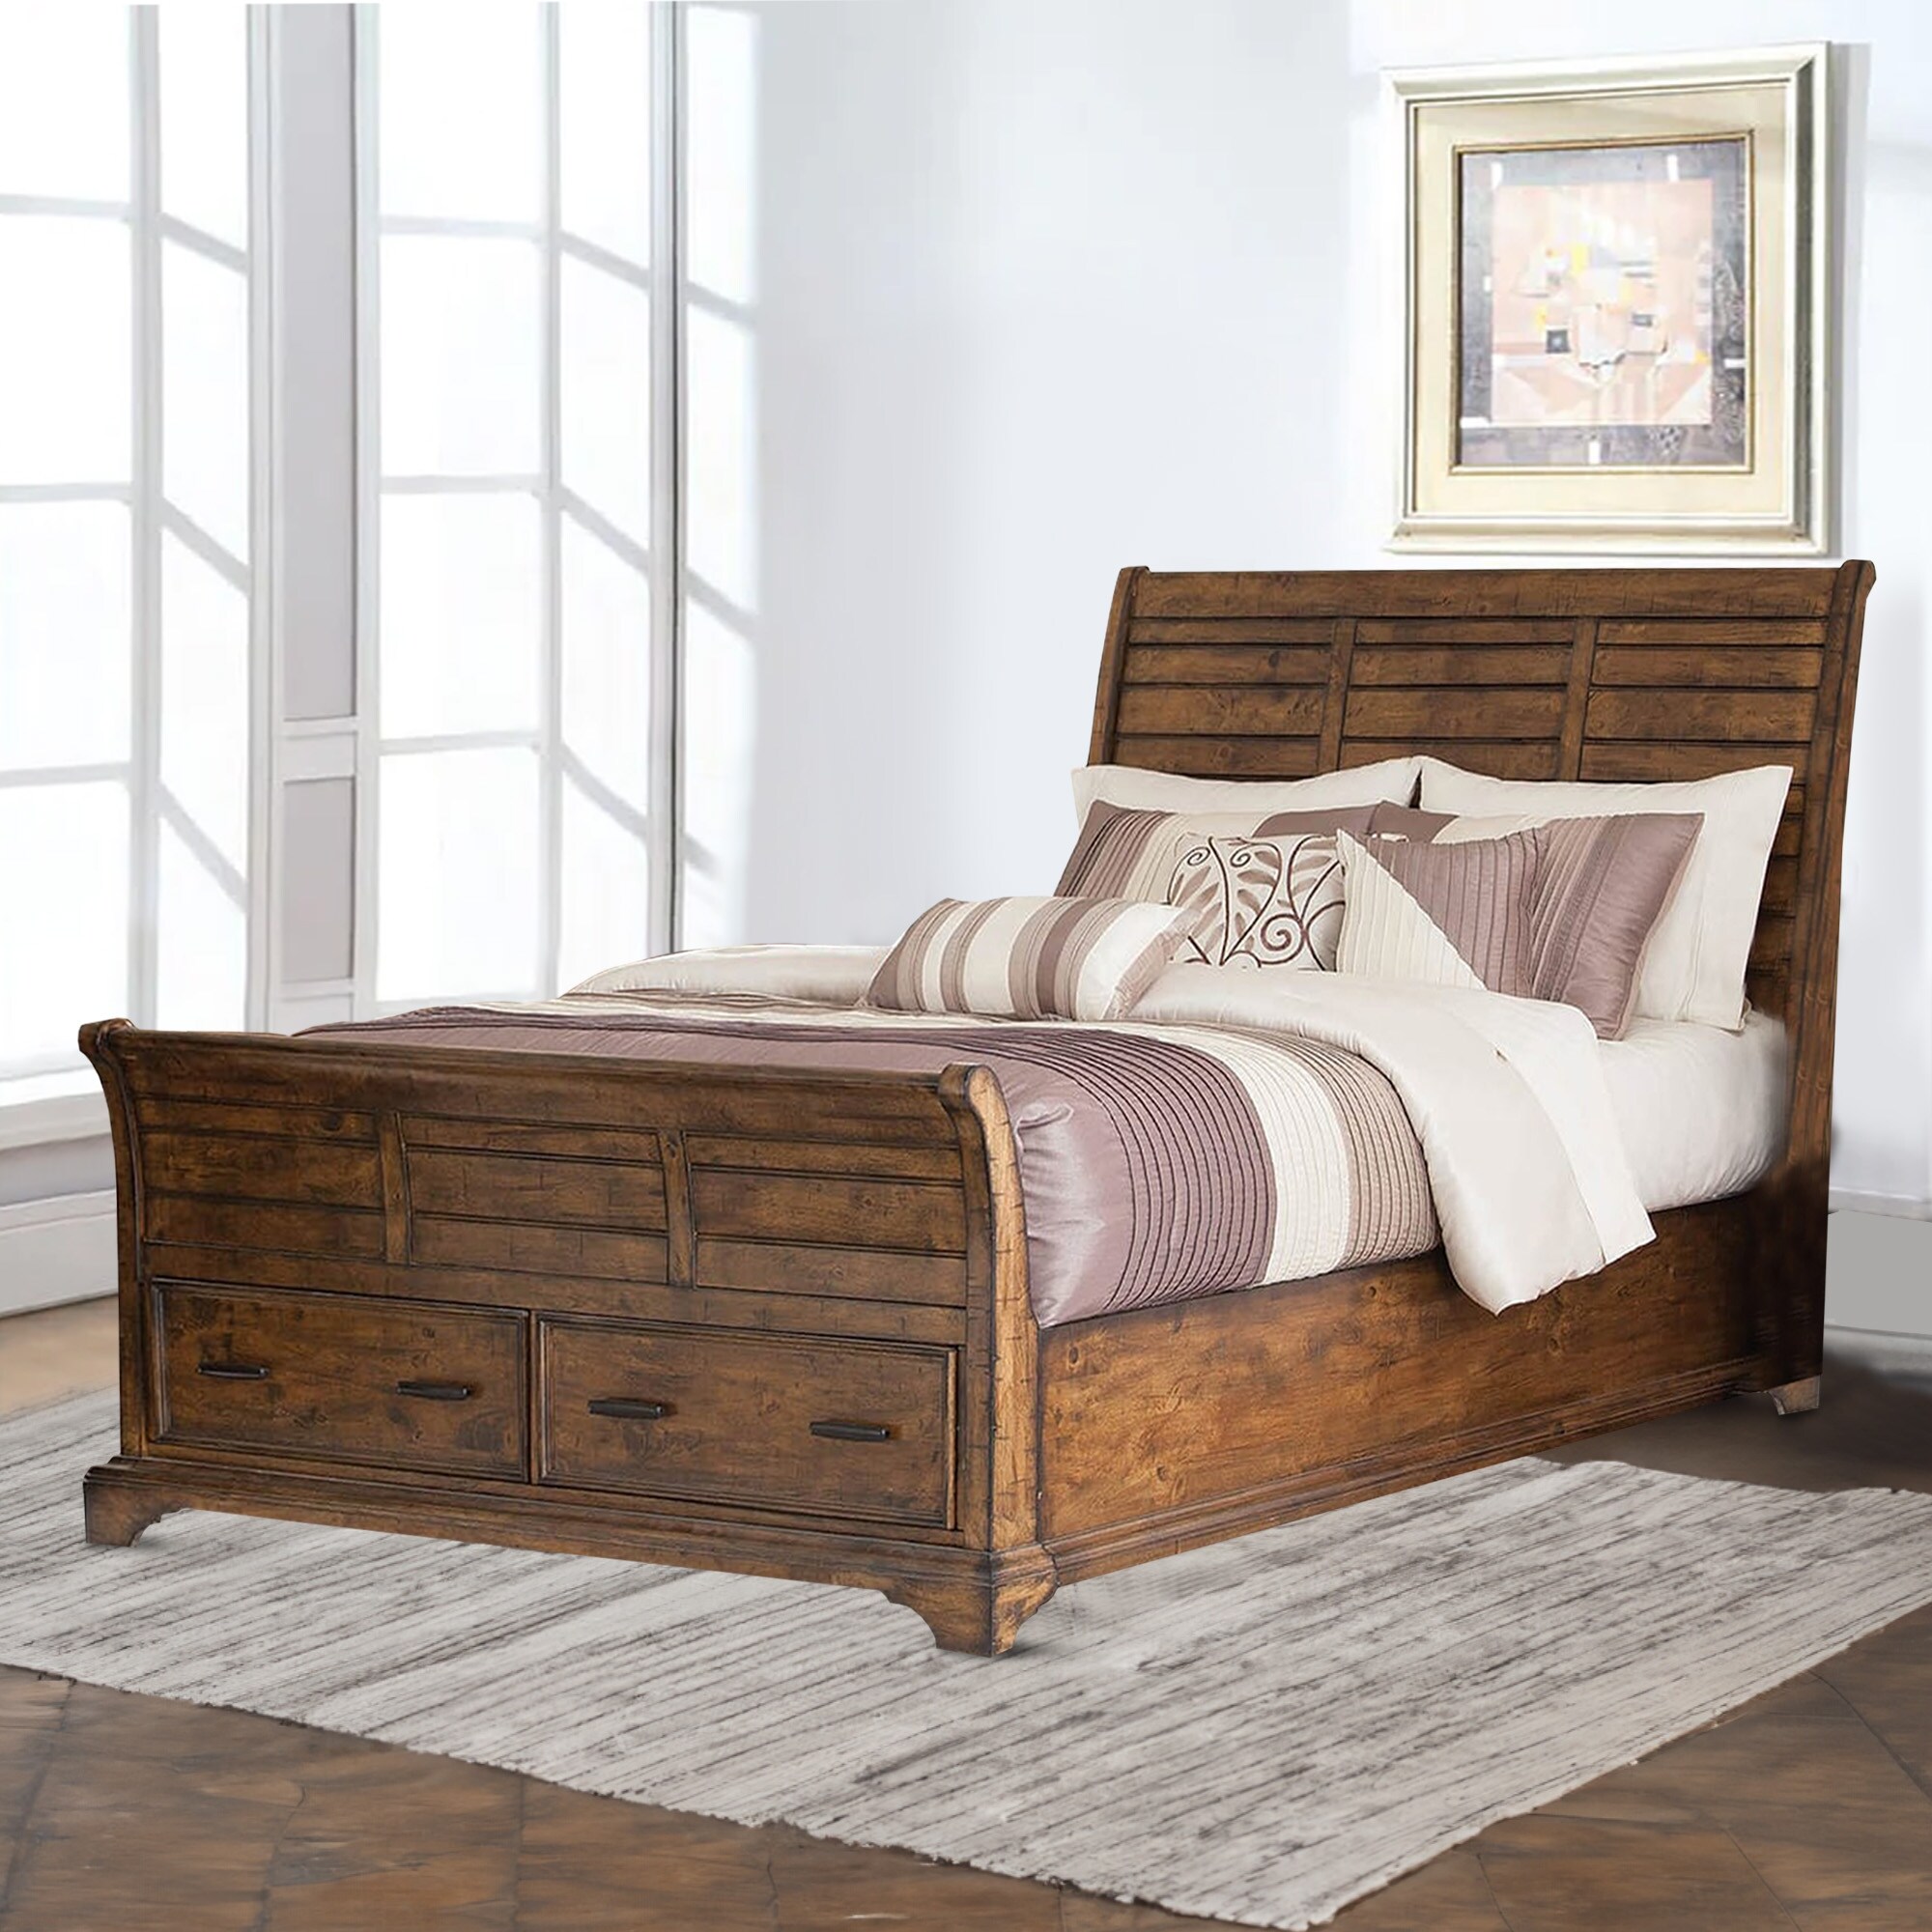 Plank Style Wooden Eastern King Size Bed with Footboard Storage, Brown